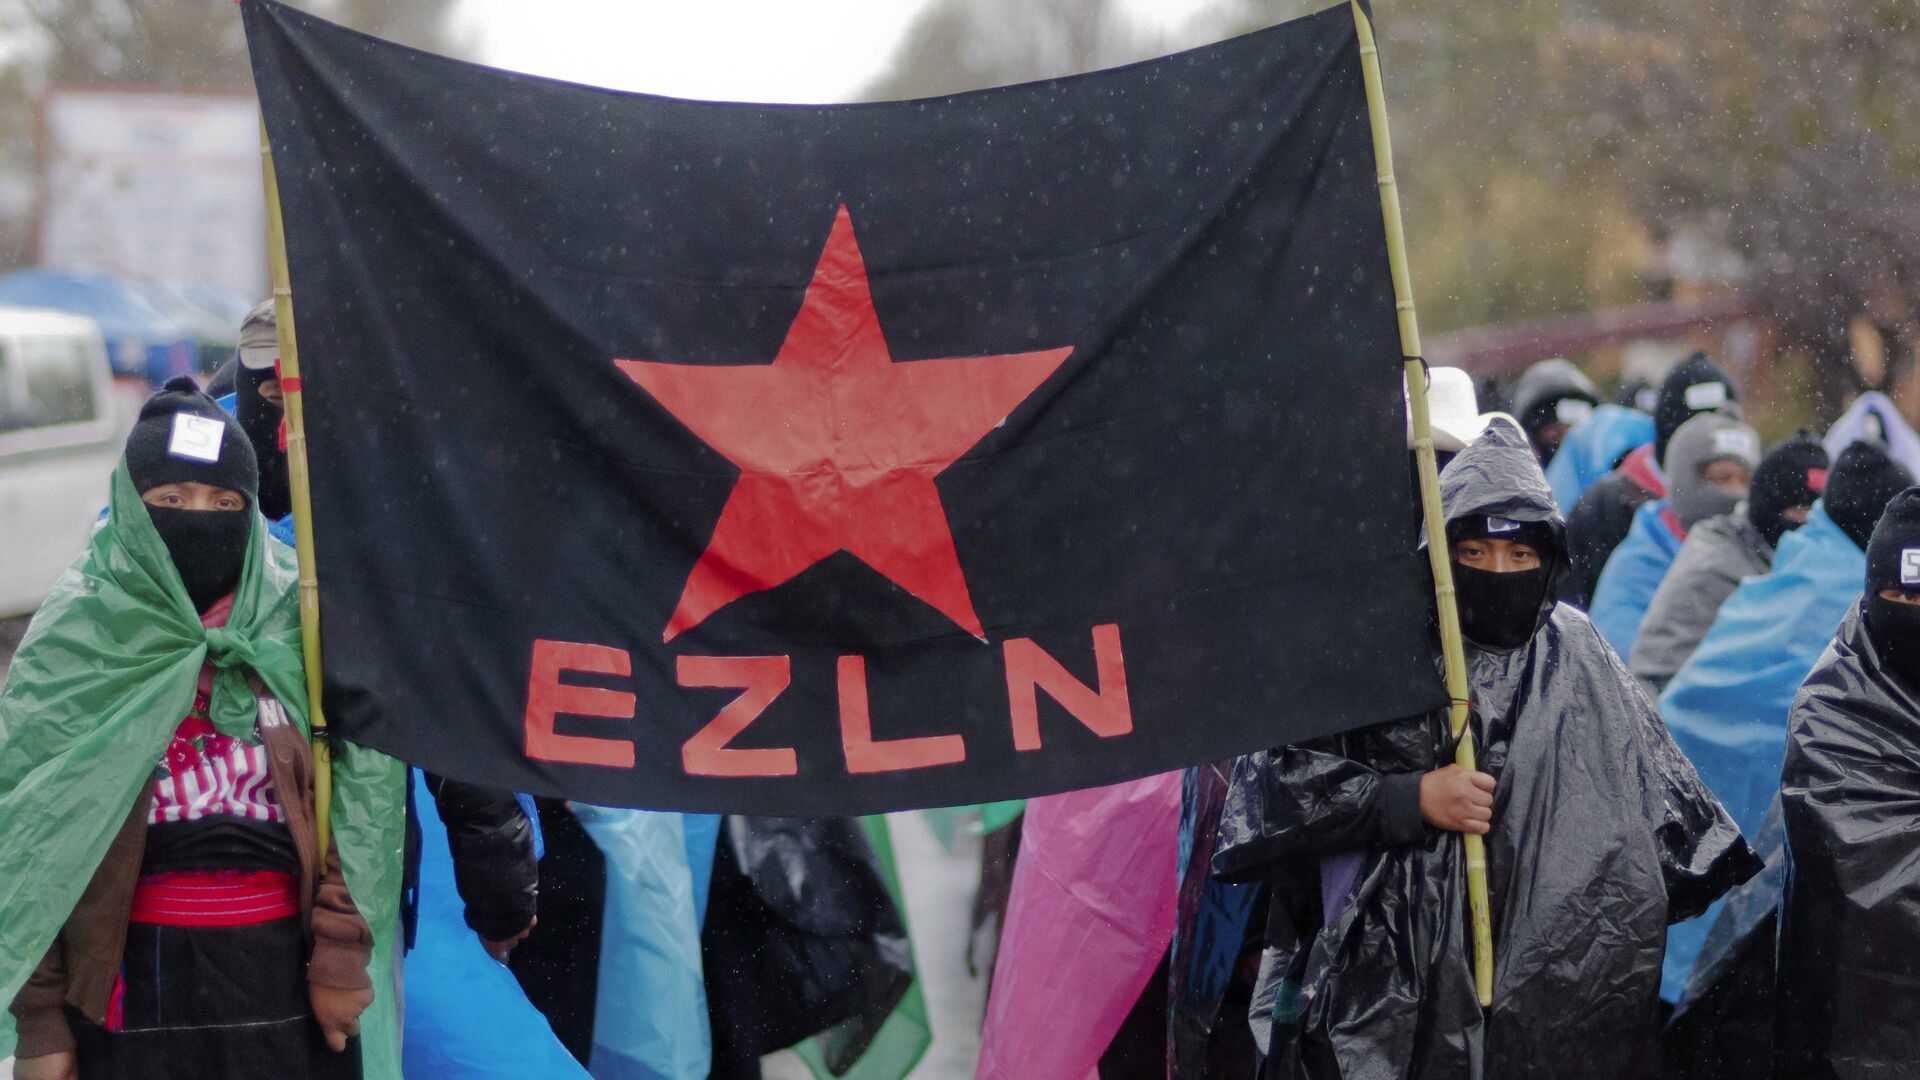 Mayan indigenous people with their faces covered, hold a flag of the Zapatista Army of National Liberation (EZLN) during a march in San Critobal de las Casa, Chiapas state, Mexico on December 21, 2012, - Sputnik Mundo, 1920, 13.09.2021